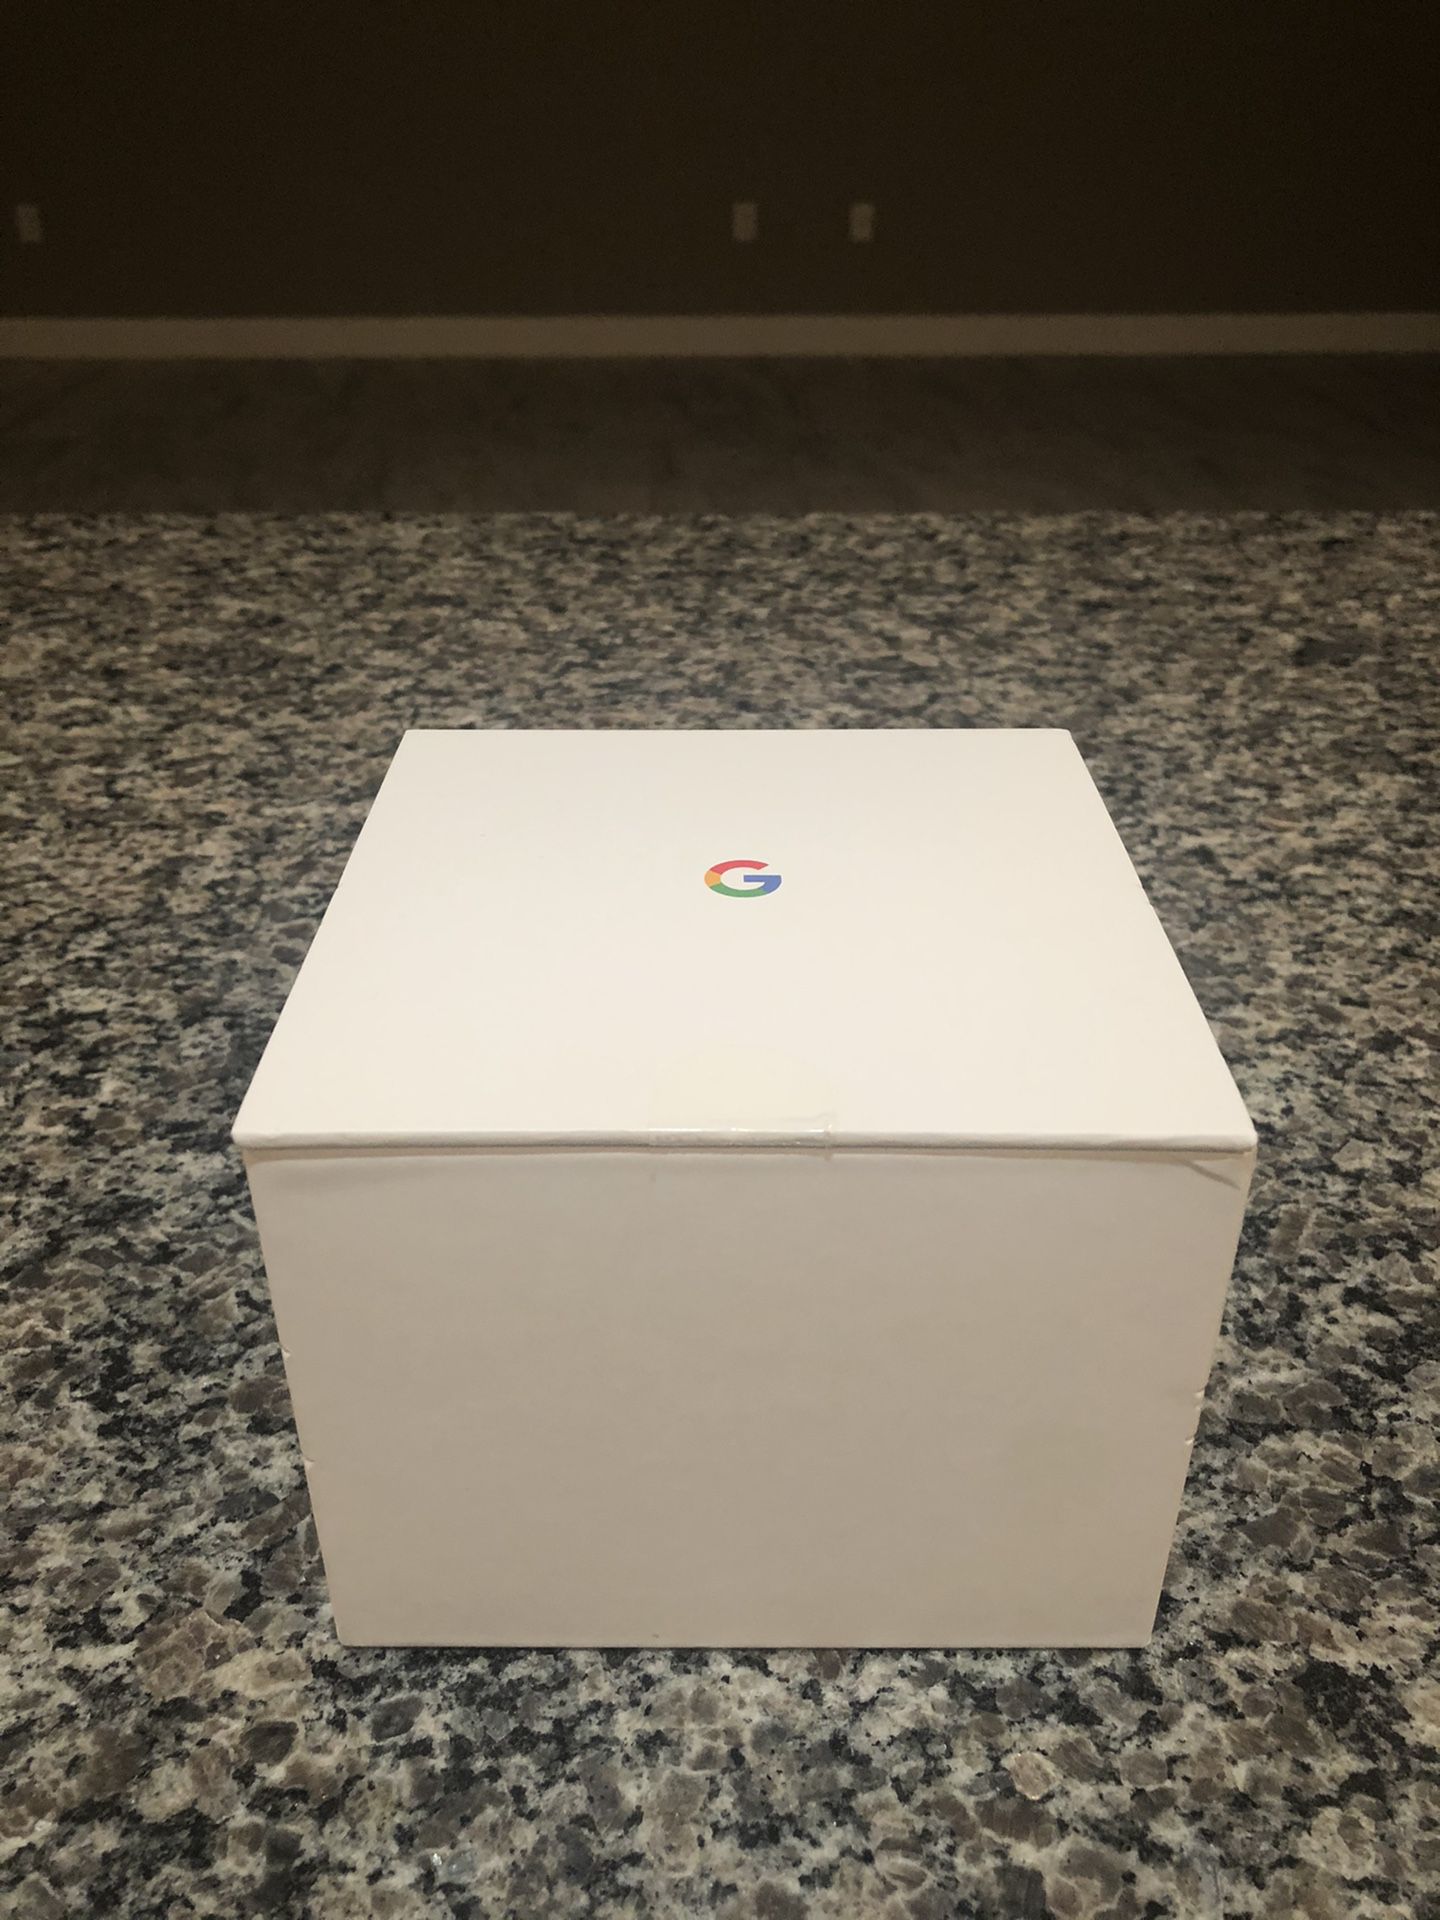 Google WiFi Router (1st Generation)